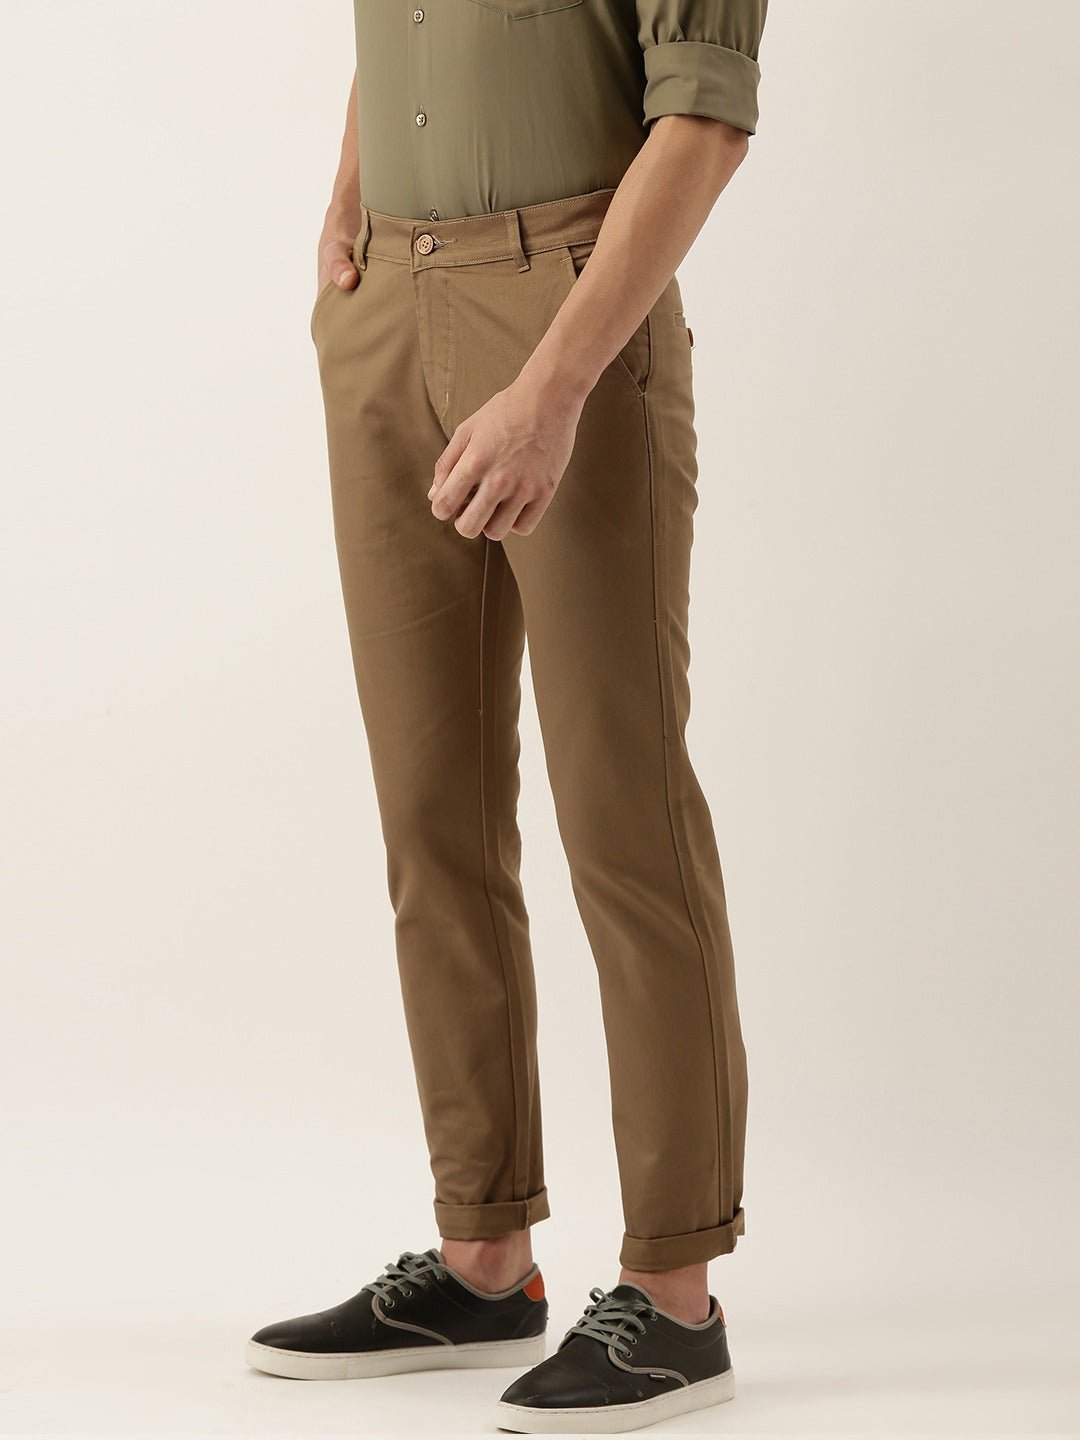 Mens Formal Cotton Pants at Wholesale Price - Exporter, Manufacturer and  Supplier